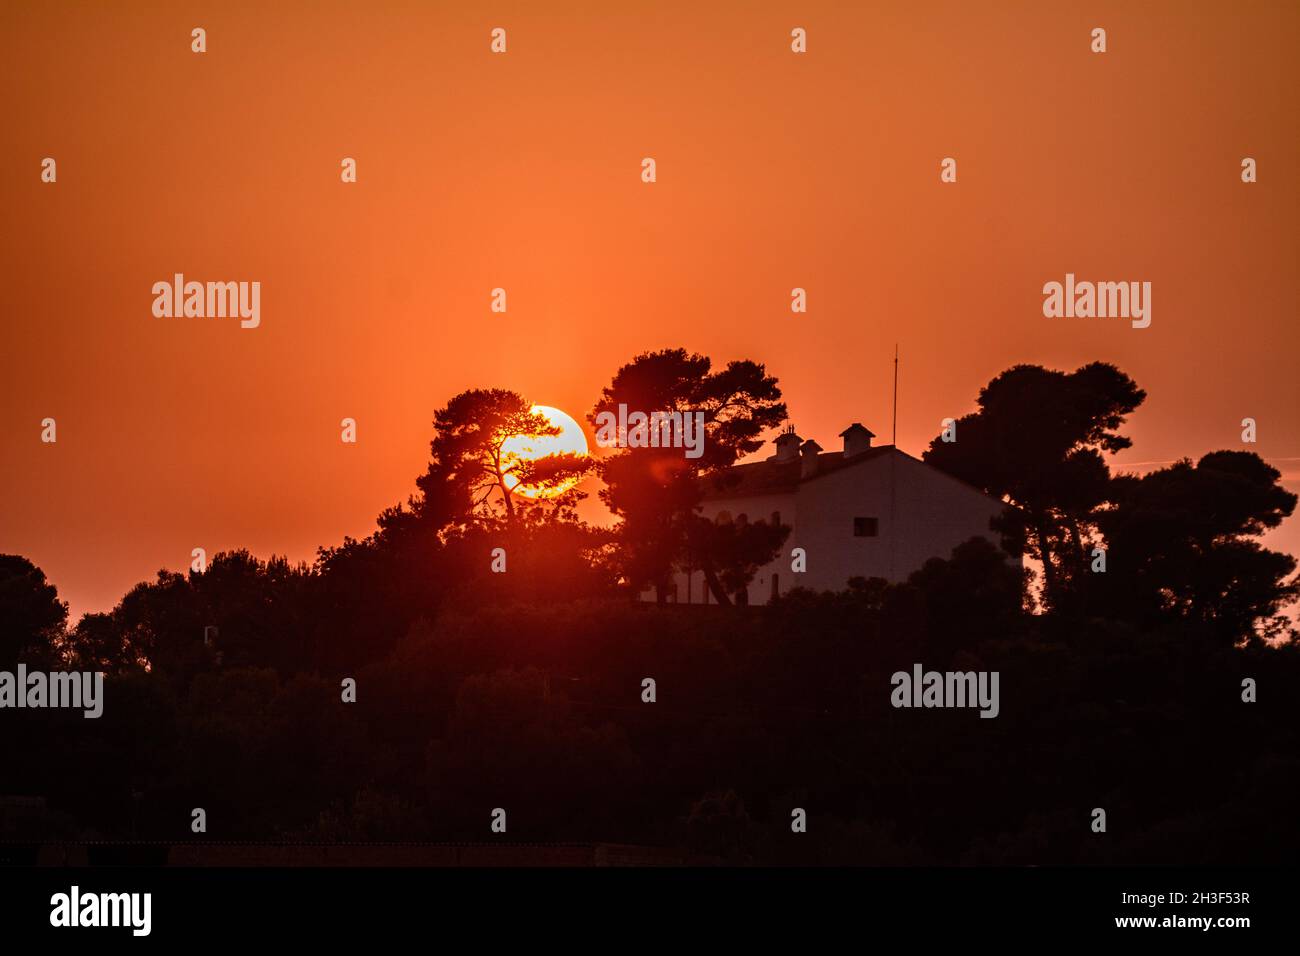 SUECA, SPAIN - Sep 28, 2021: A fascinating view of trees and a house at colorful sunset. Stock Photo